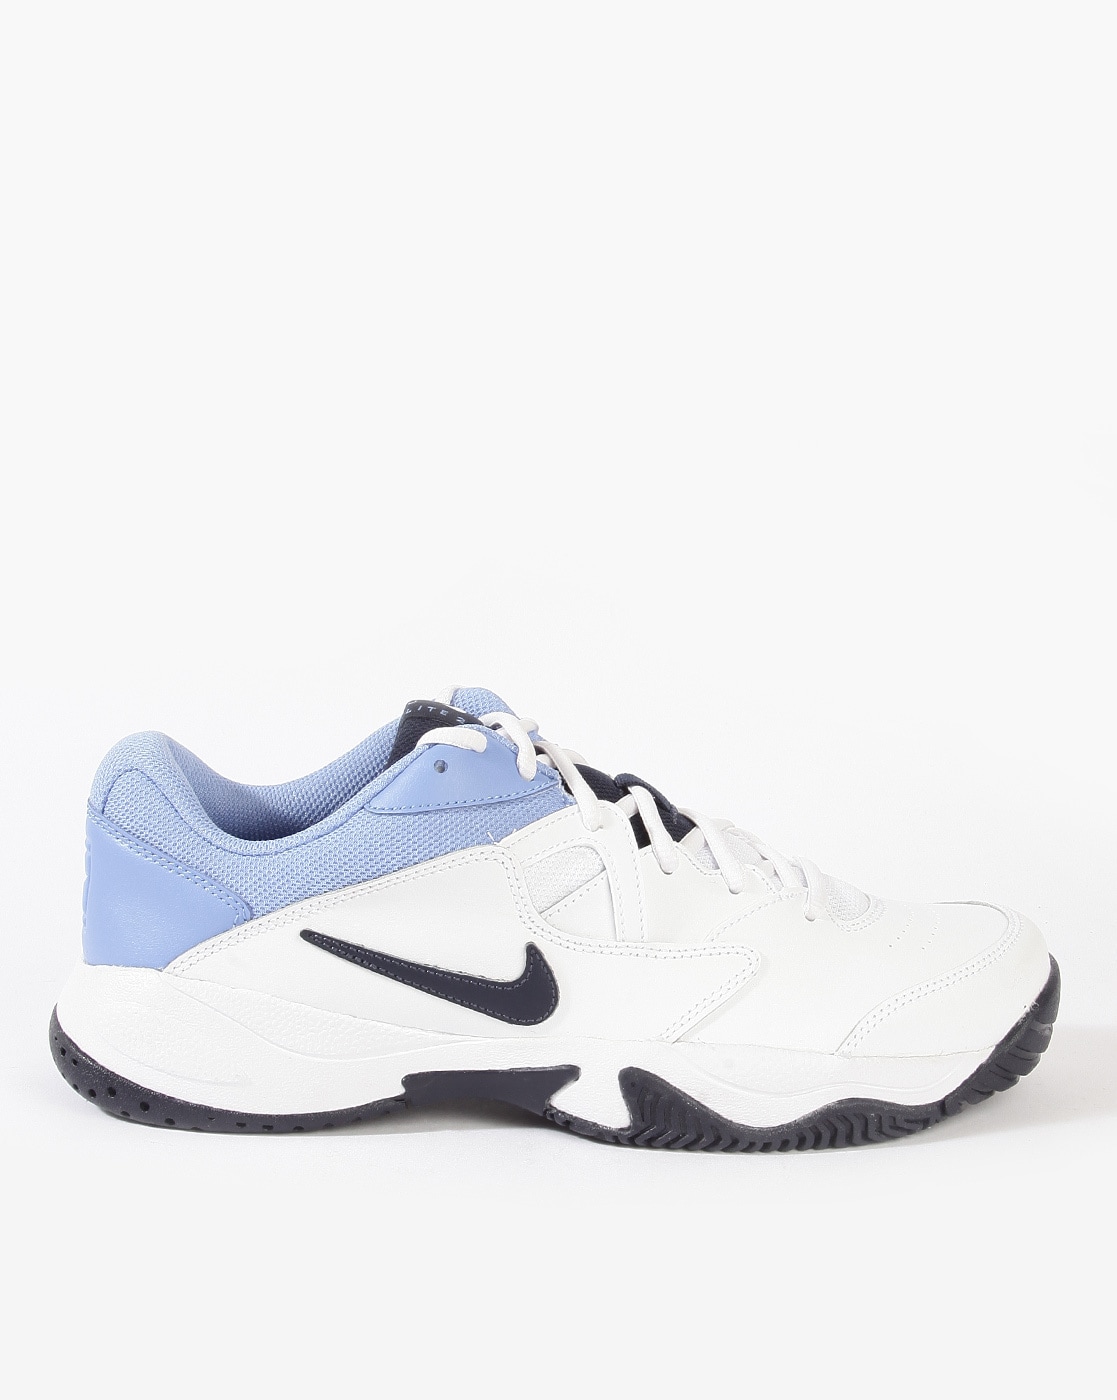 mens nike white leather tennis shoes